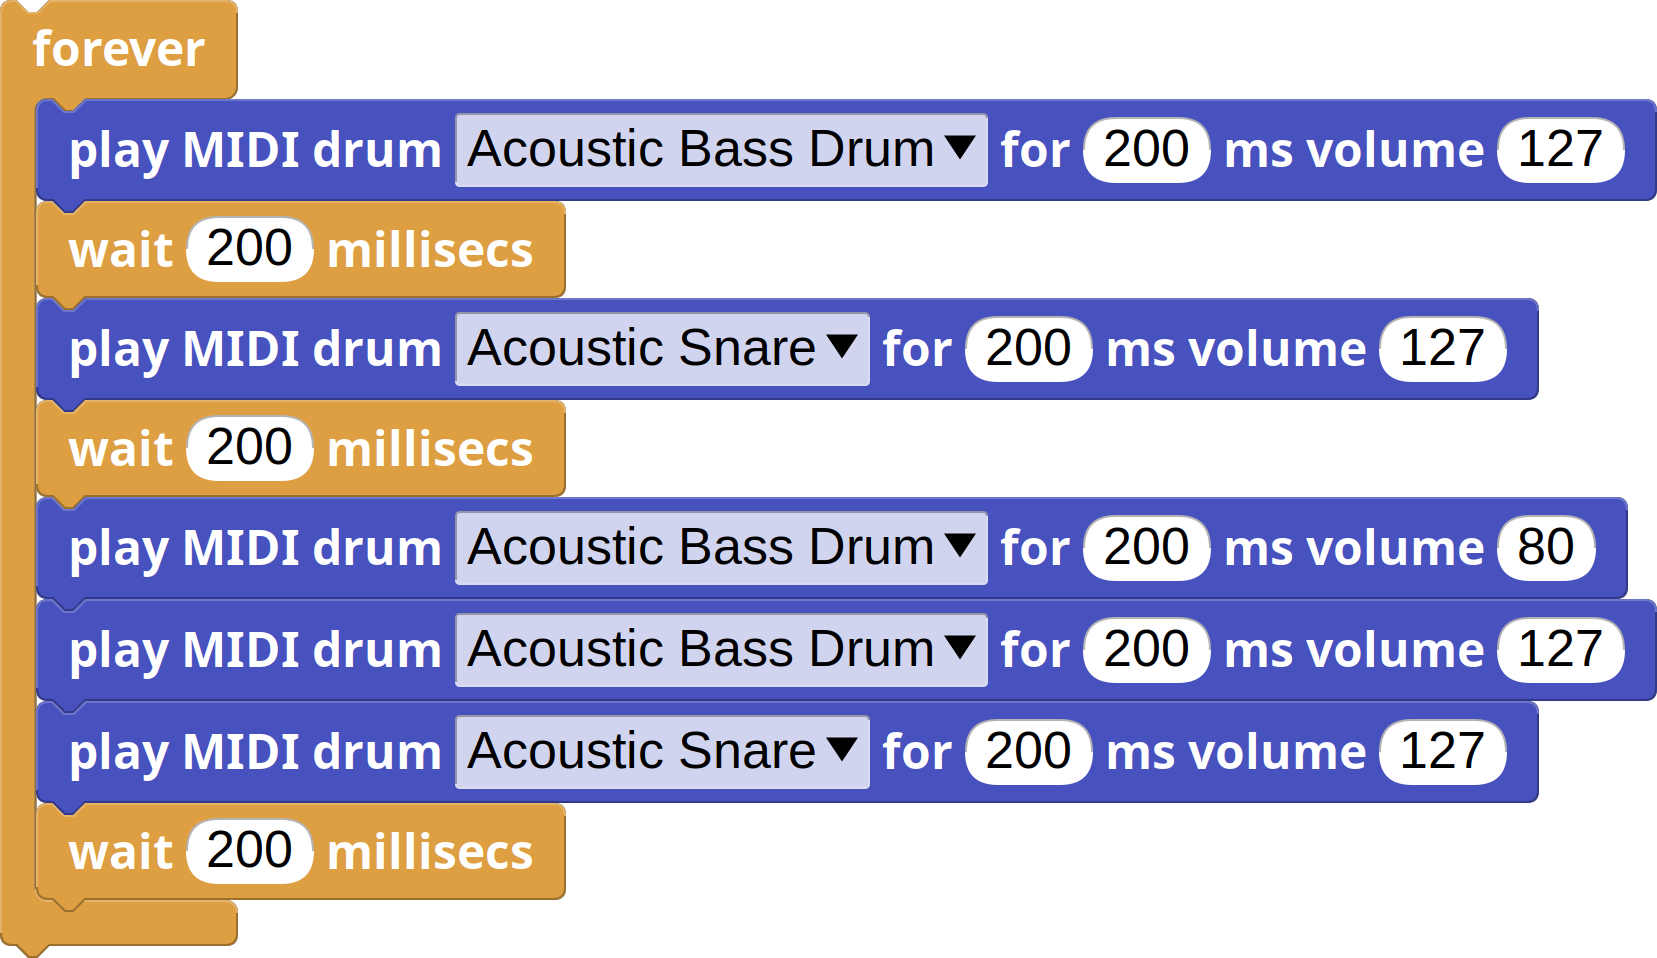 a simple rock drum pattern using a forever loop and wait
blocks